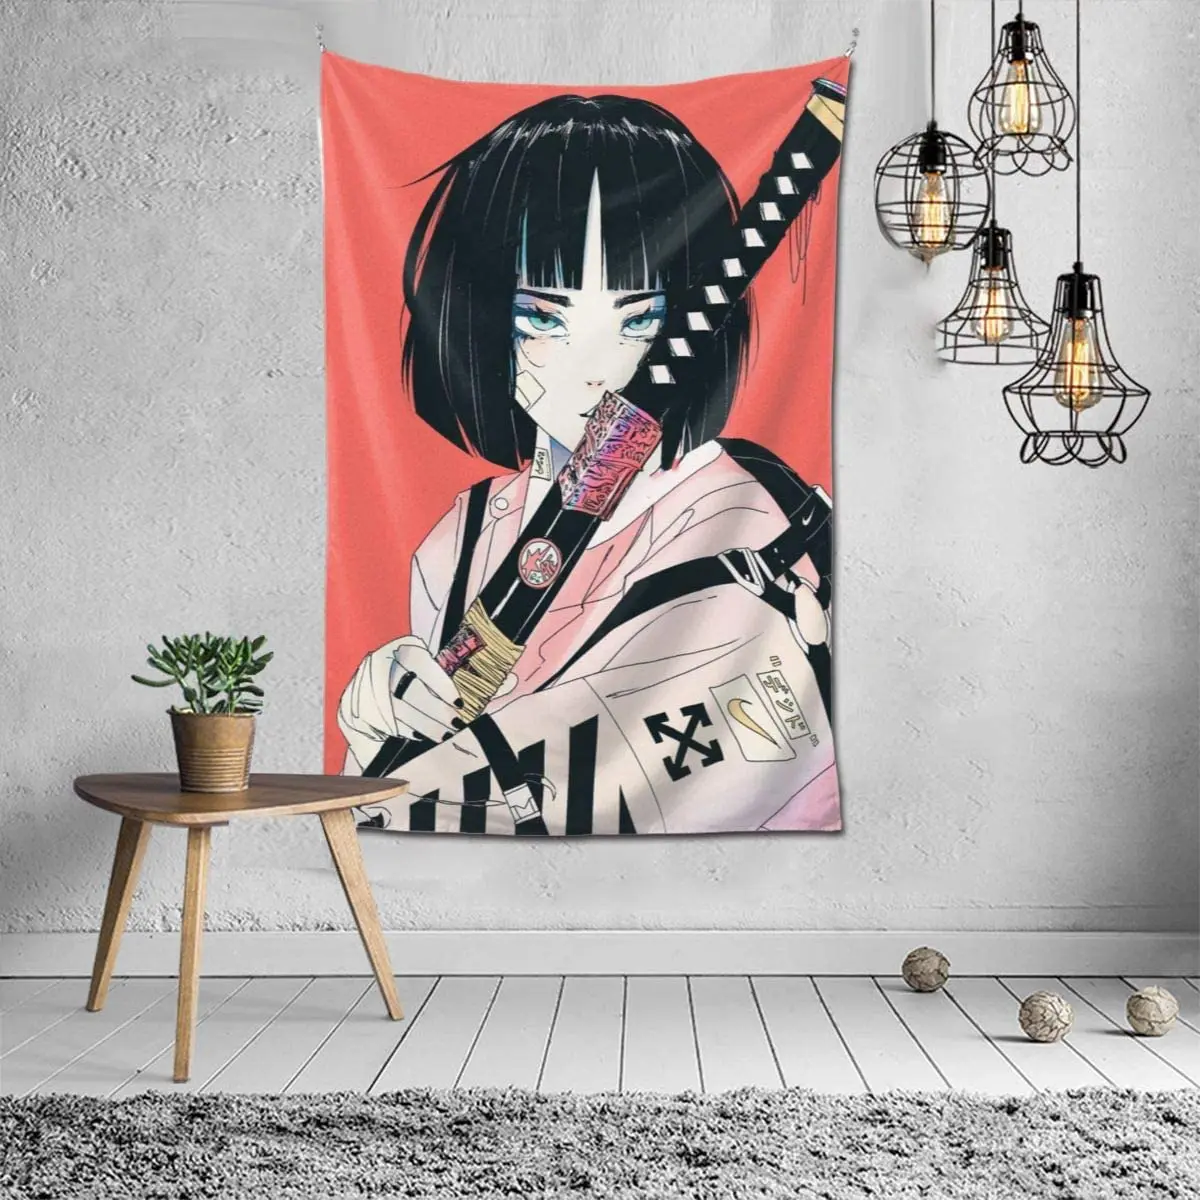 

Samurai Anime Girl Abstract Tapestries Wall Hanging Tapestry Wall Art Dorm Accessories Mandala Dorm Tapestry Decoration Mural